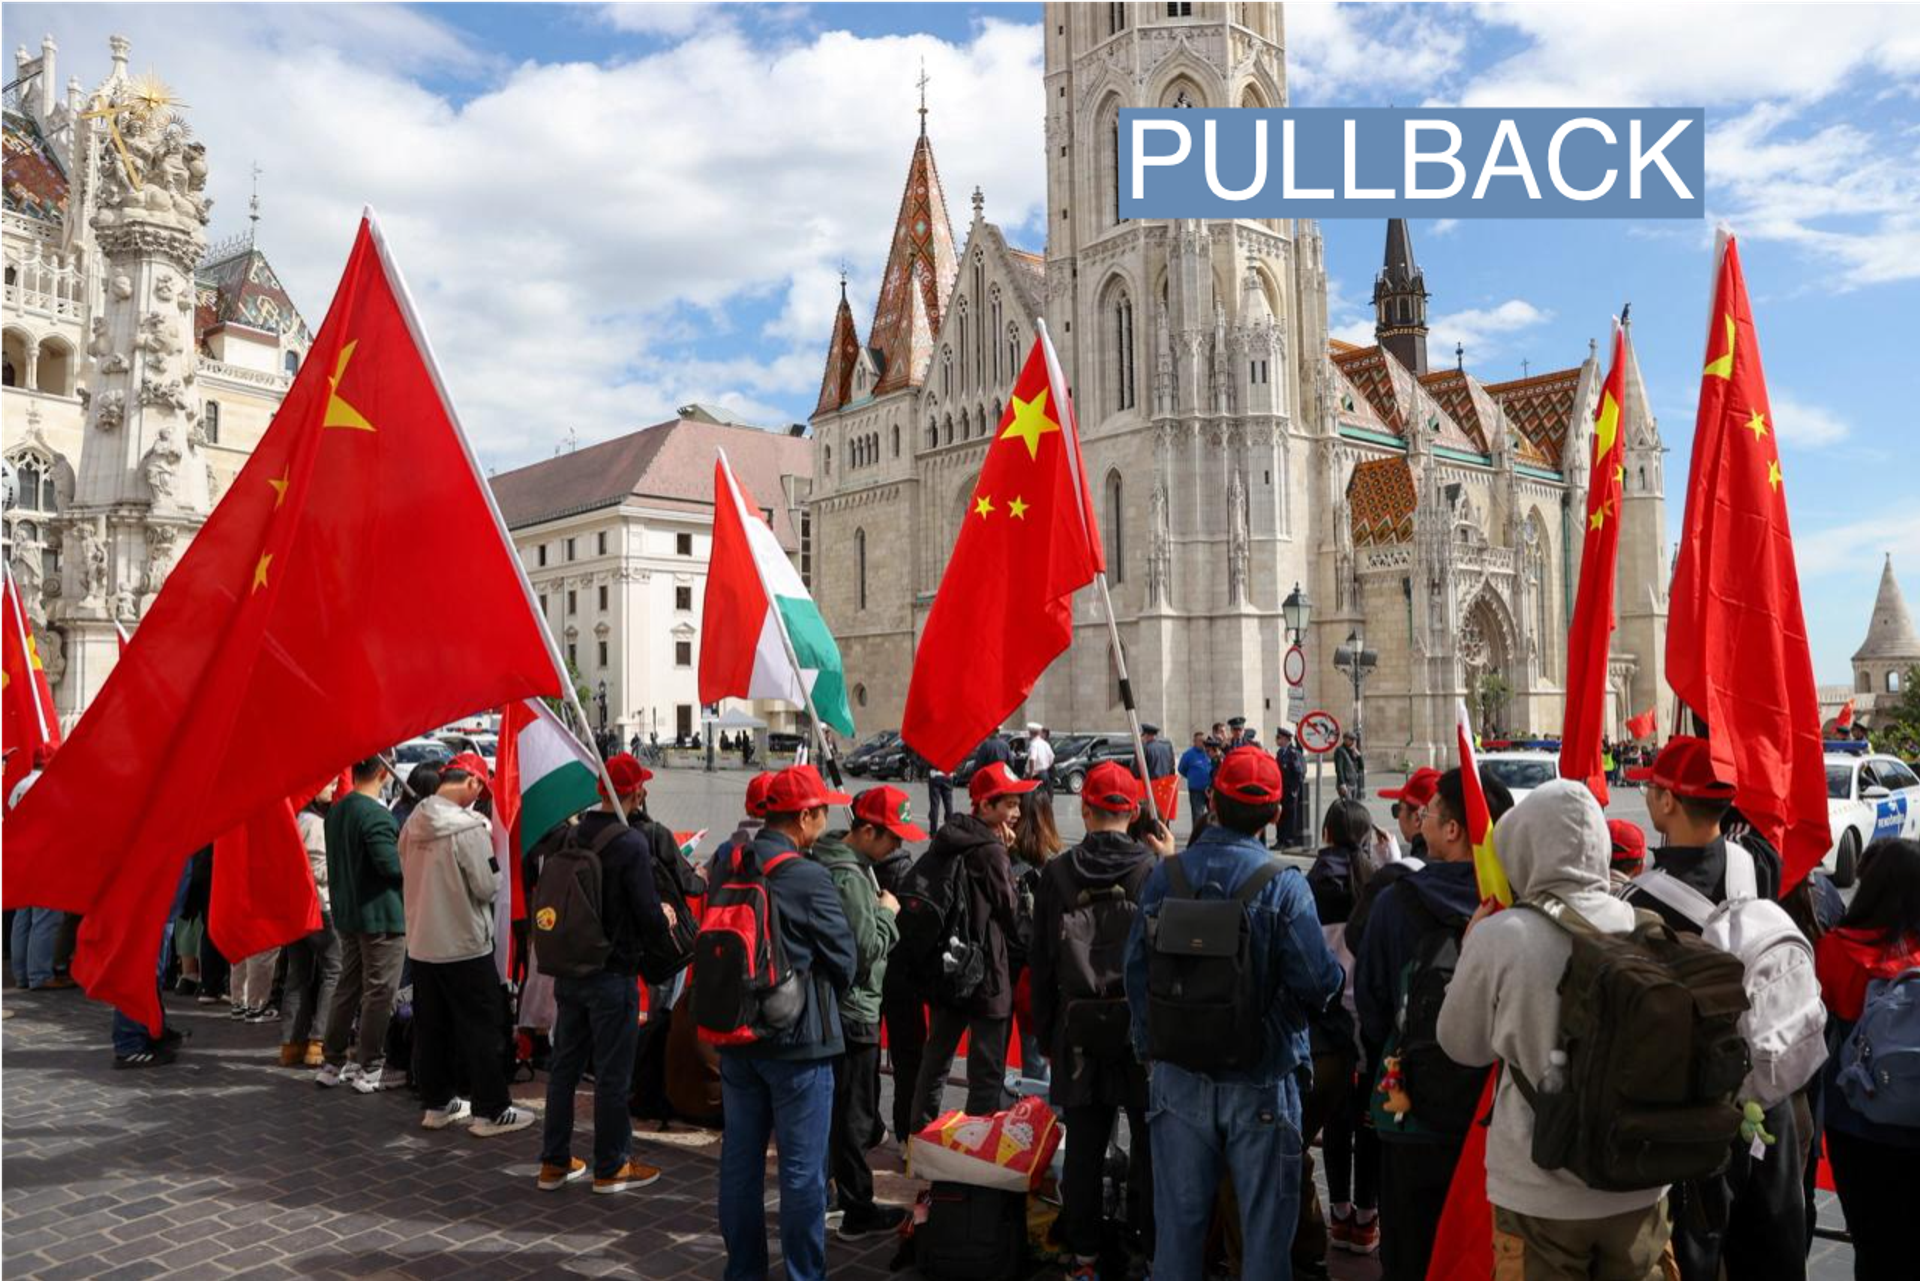 Pro-China supporters in Hungary